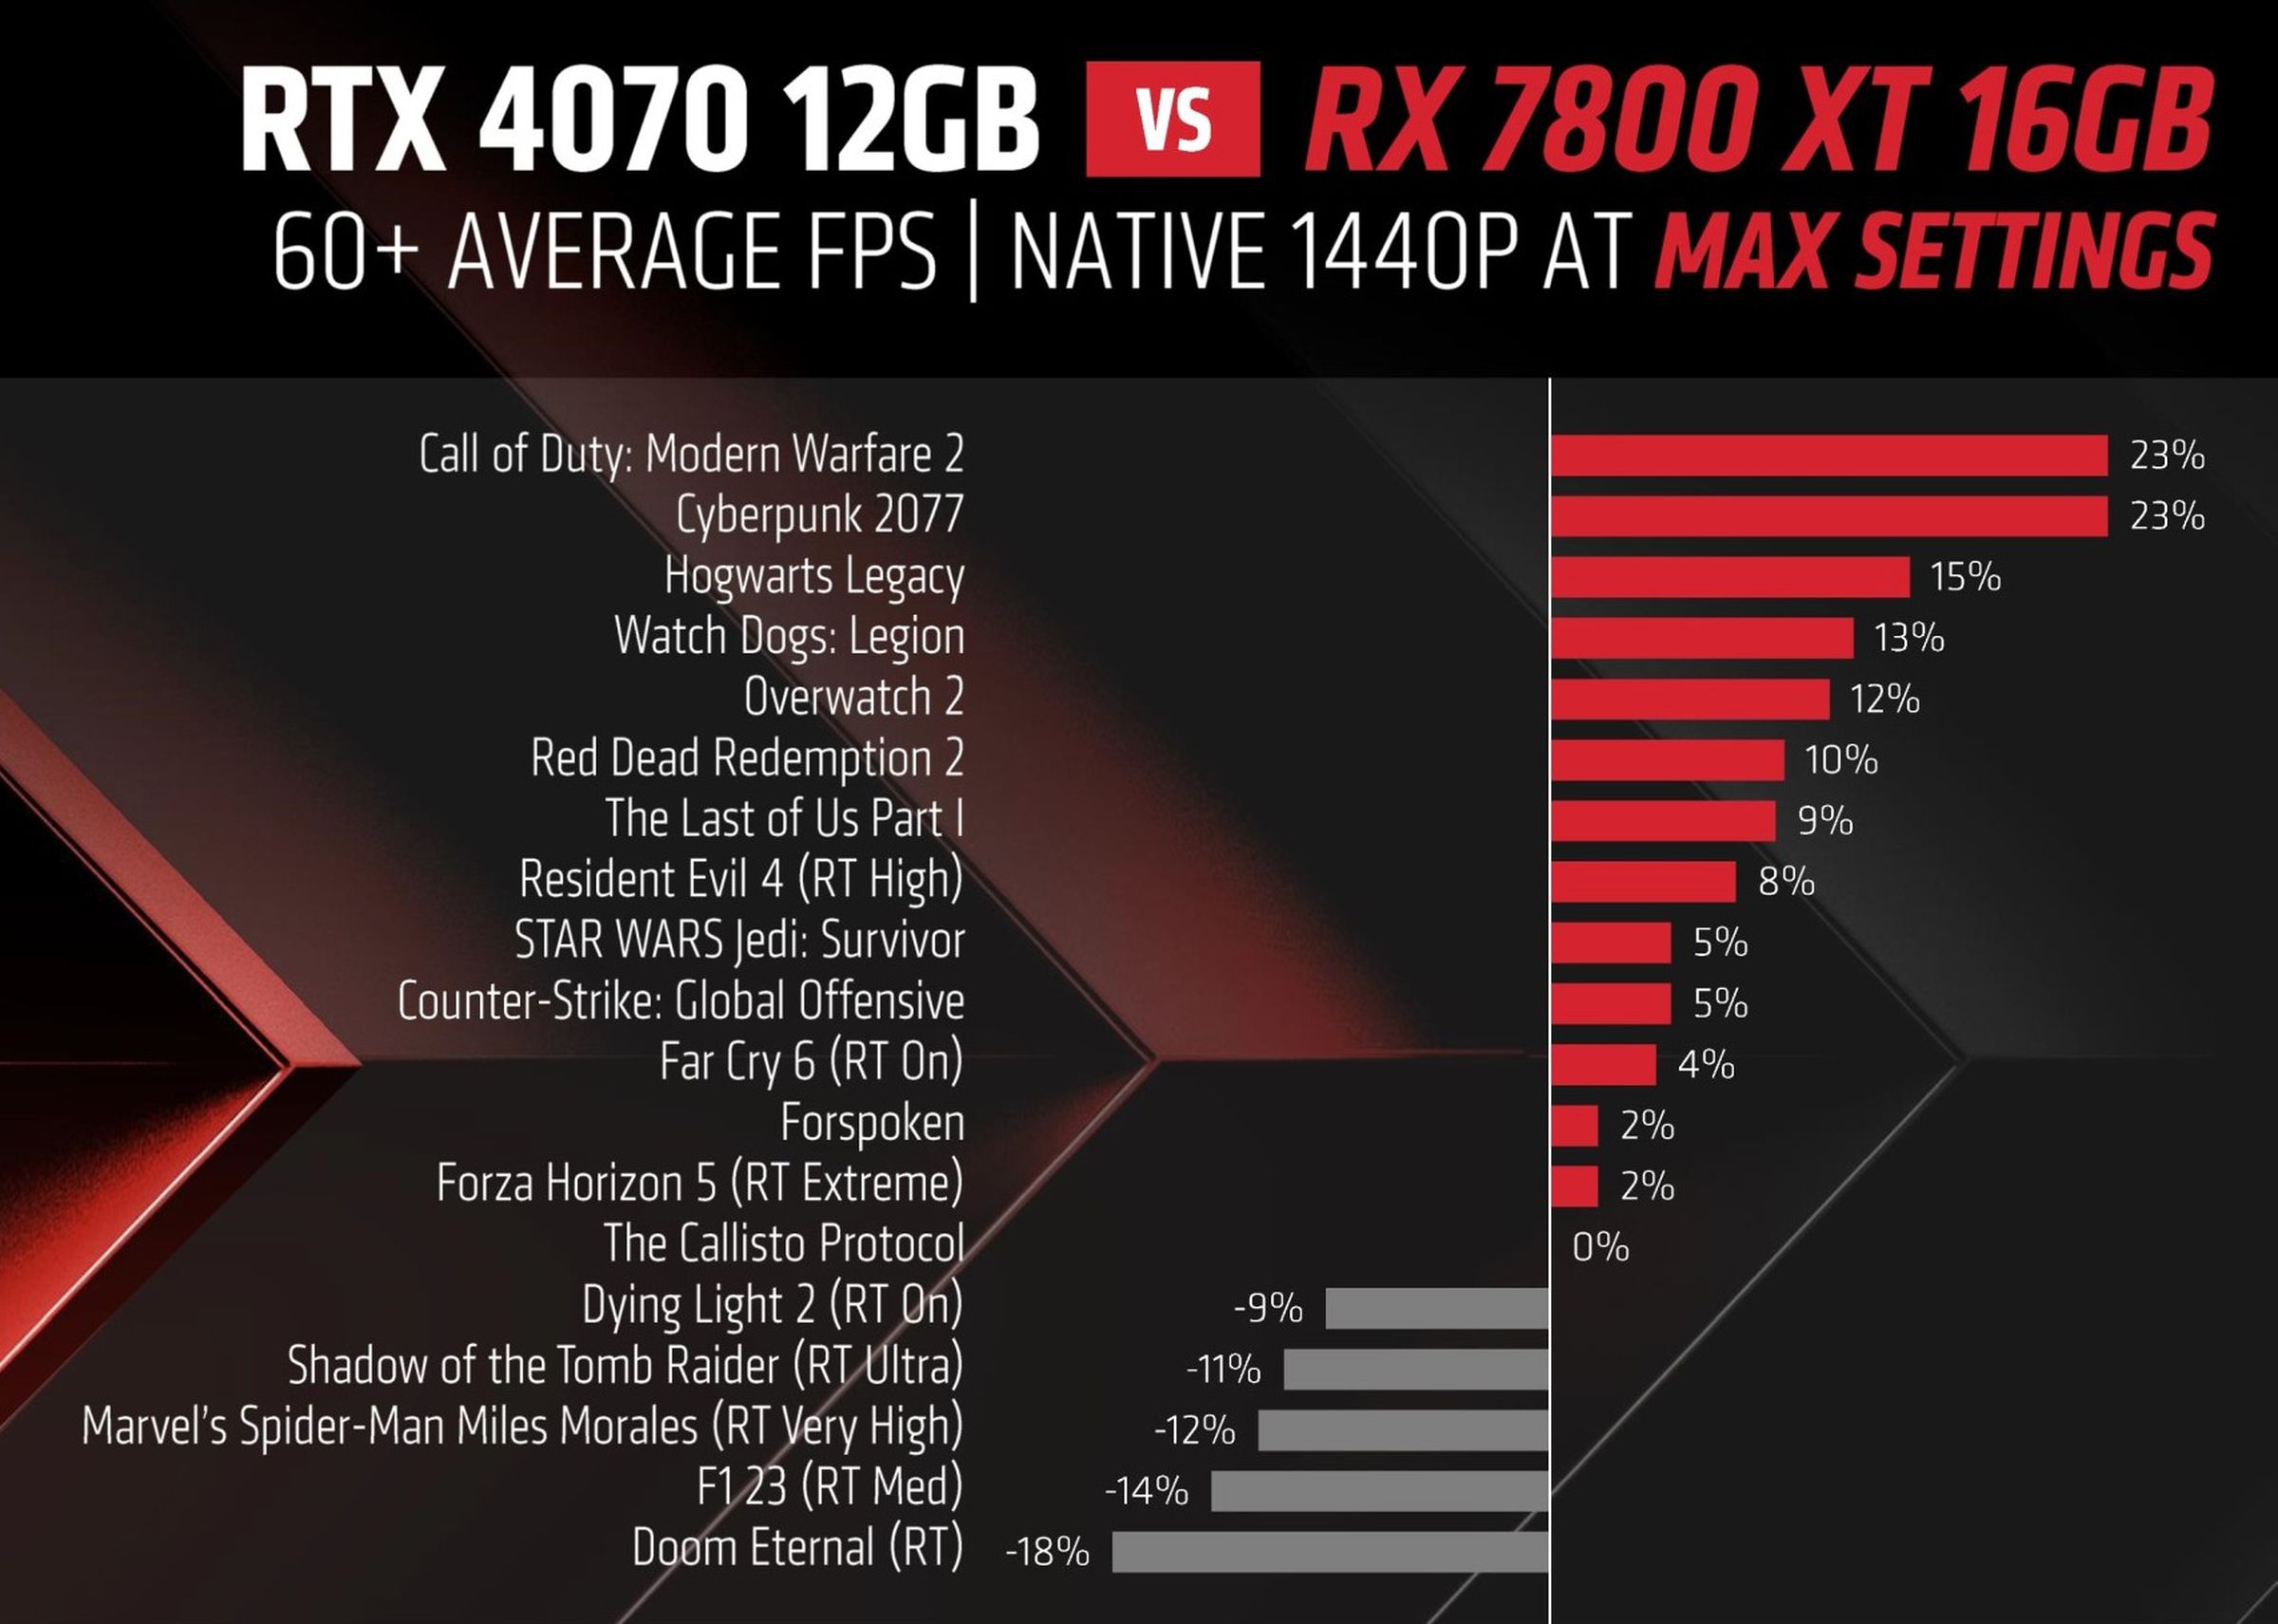 RX 7800 XT vs RTX 4070 - which is better? - PC Guide